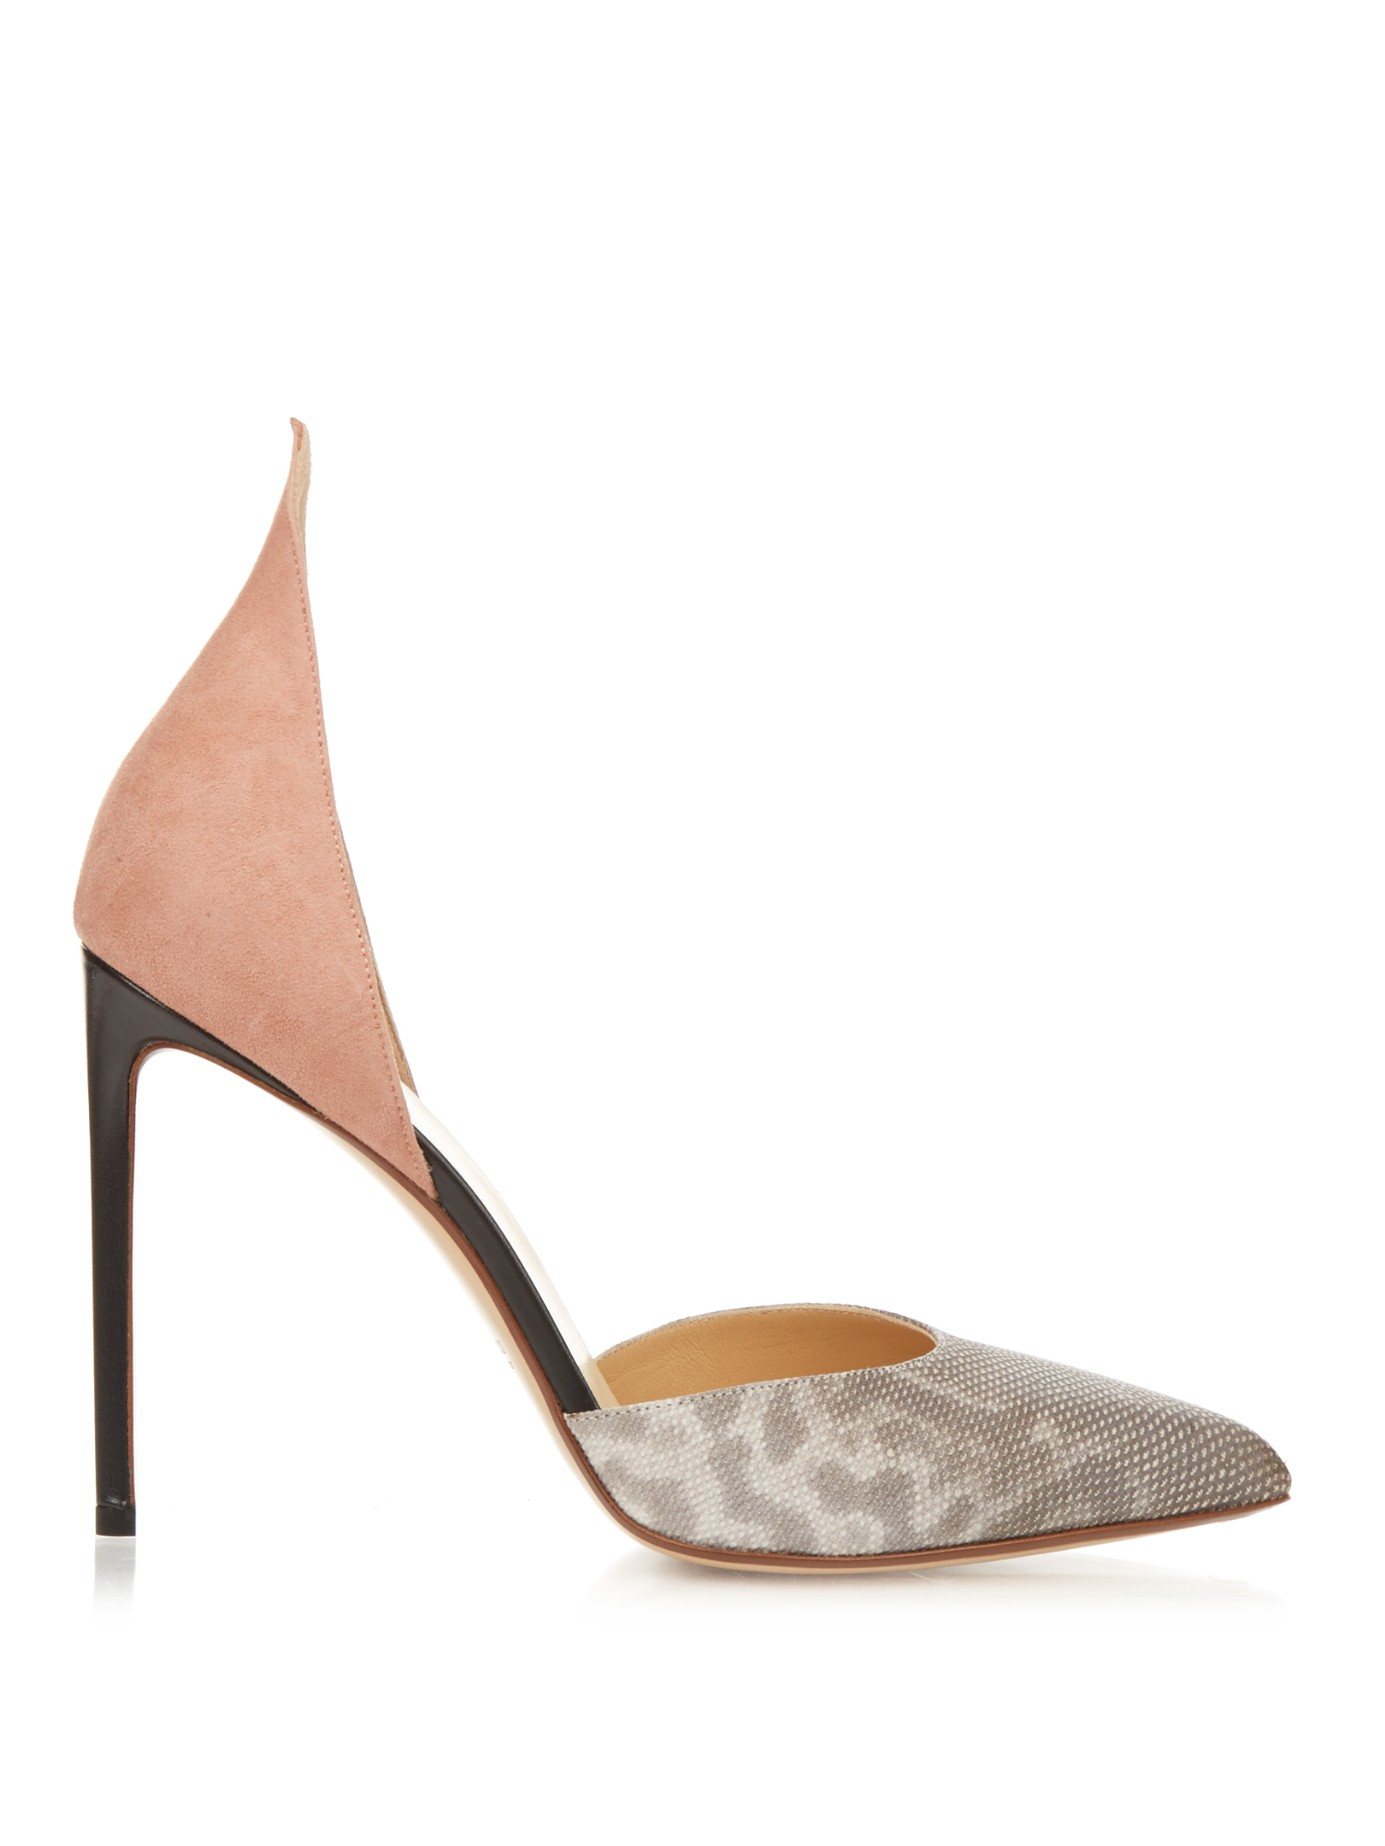 Francesco Russo Pointed-Toe Snakeskin and Suede Pumps in 